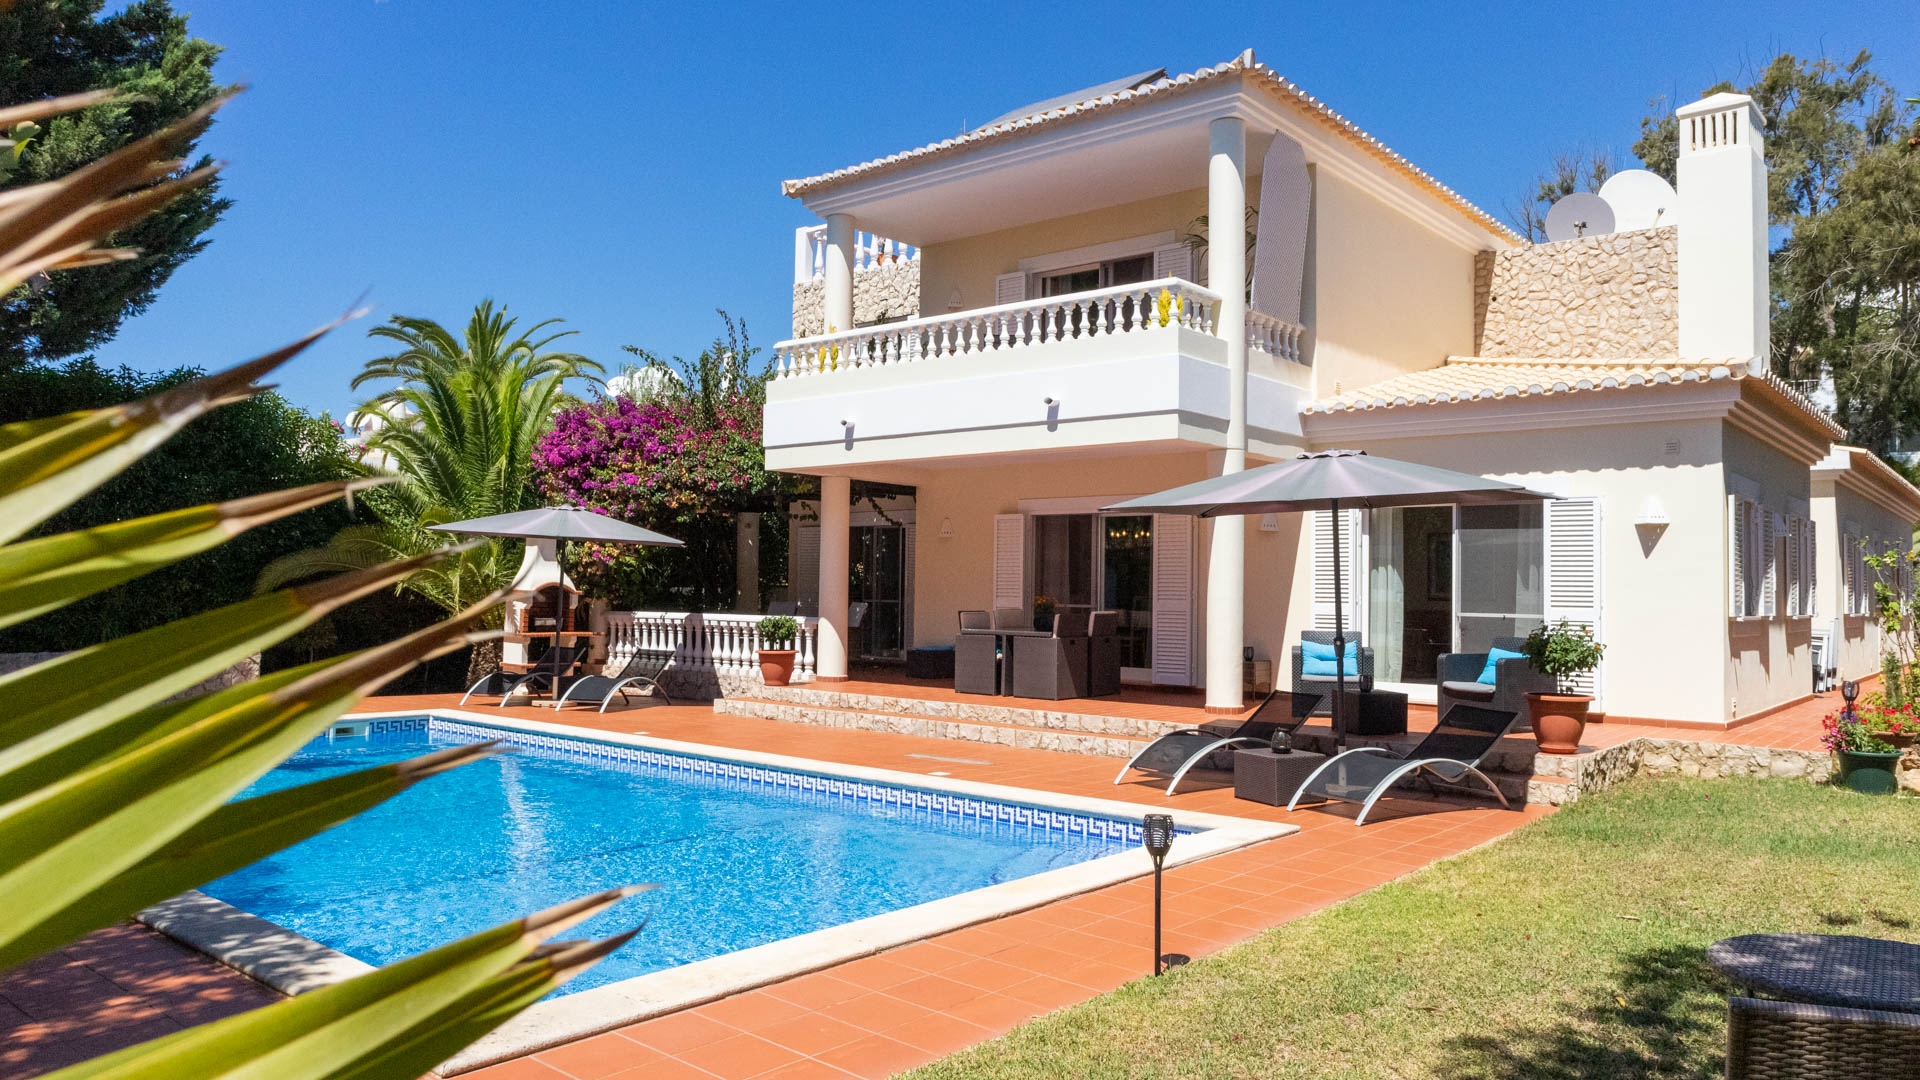 Beautiful 4 bedroom villa with sea view from roof terrace, Carvoeiro | VM770 